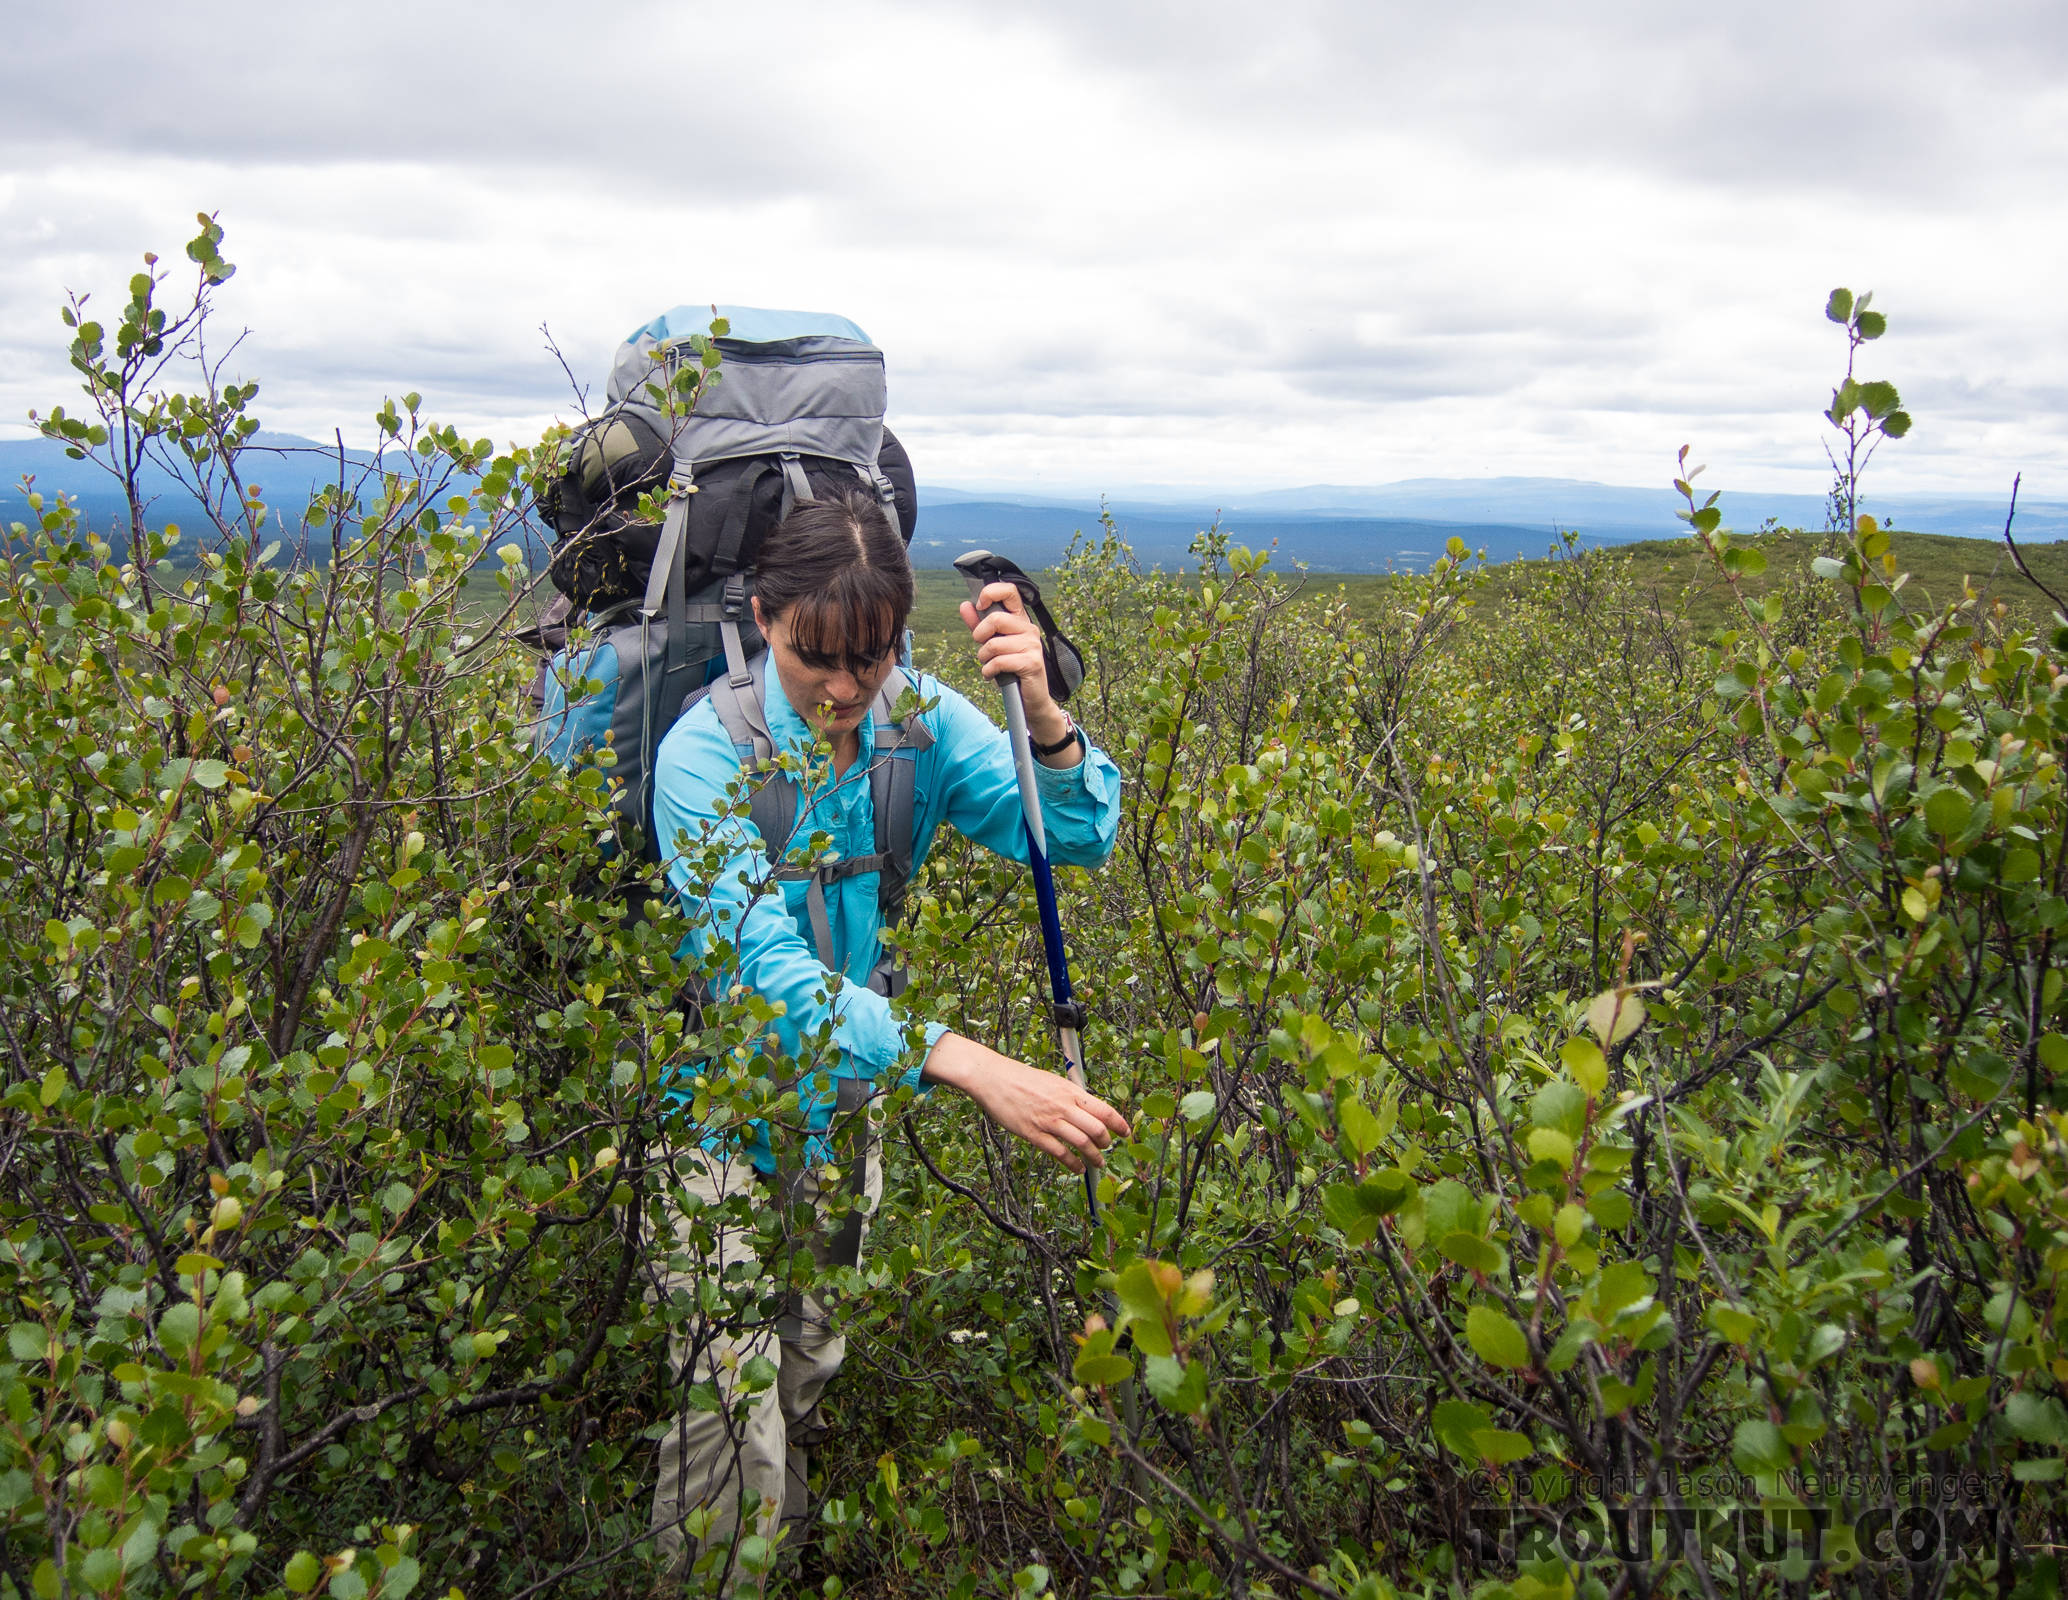 My wife bushwhacks through some dwarf birch on our way up into the mountains. There's no trail. From Clearwater Mountains in Alaska.